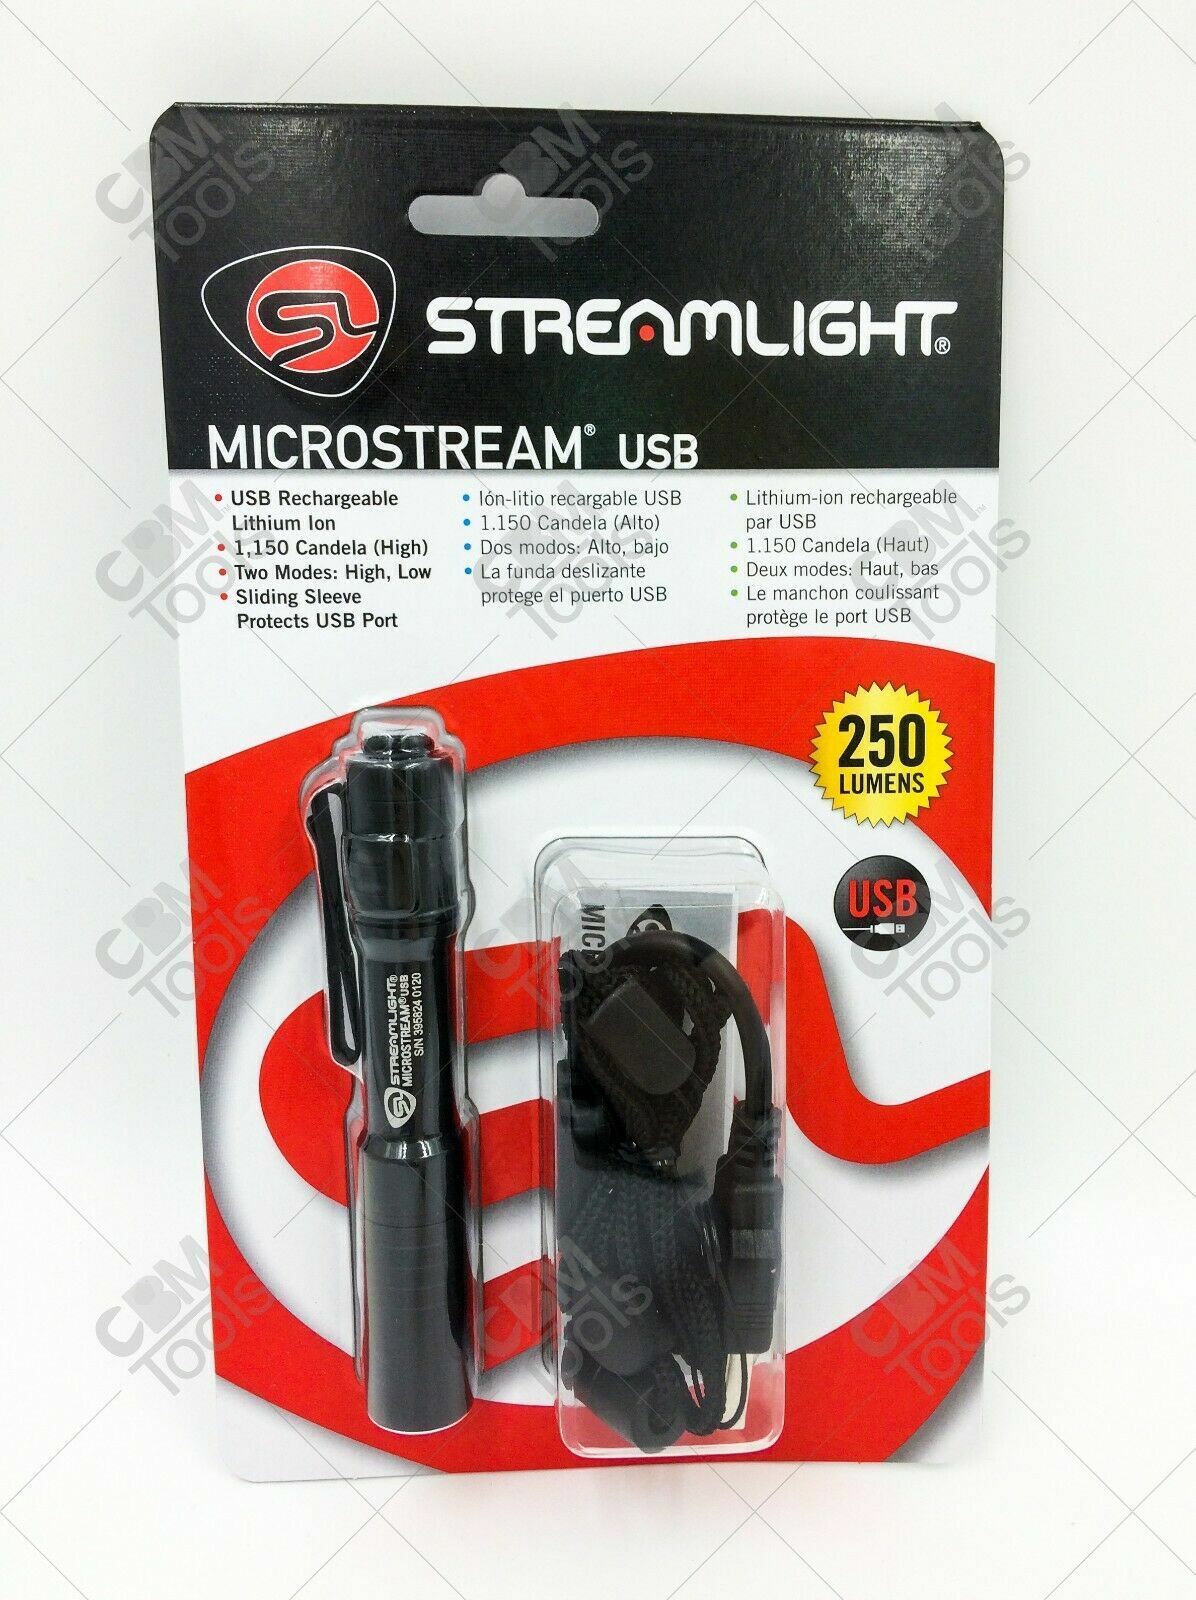 Streamlight Microstream USB Rechargeable 5